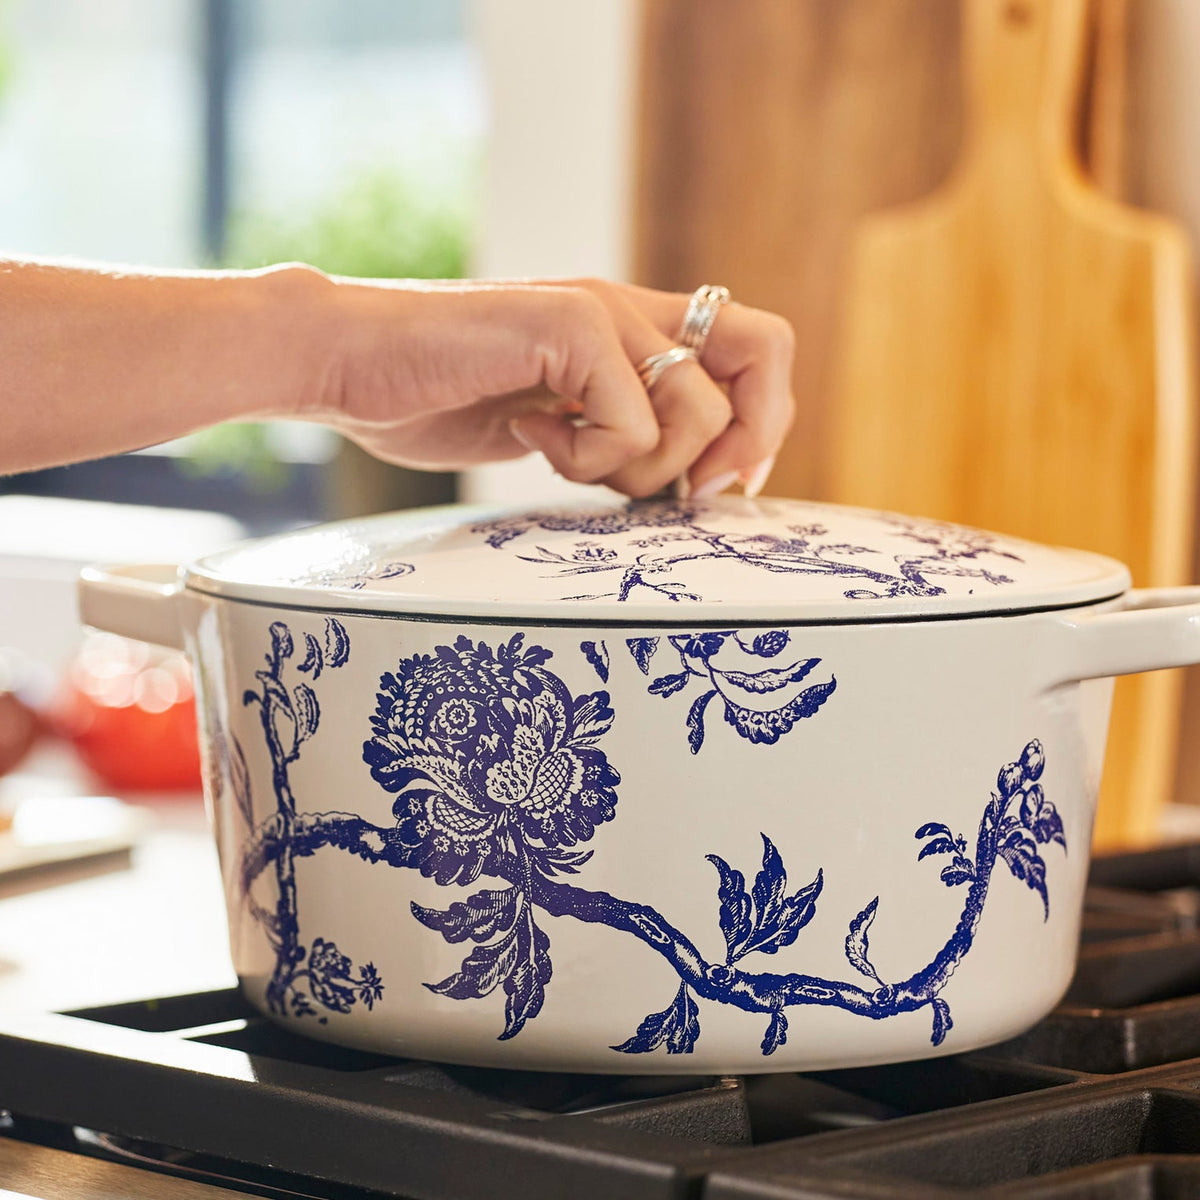 A person placing a Caskata X Cuisinart Limited Edition Arcadia Enameled Cast Iron 5 Qt. Round Casserole with Lid on a stove.